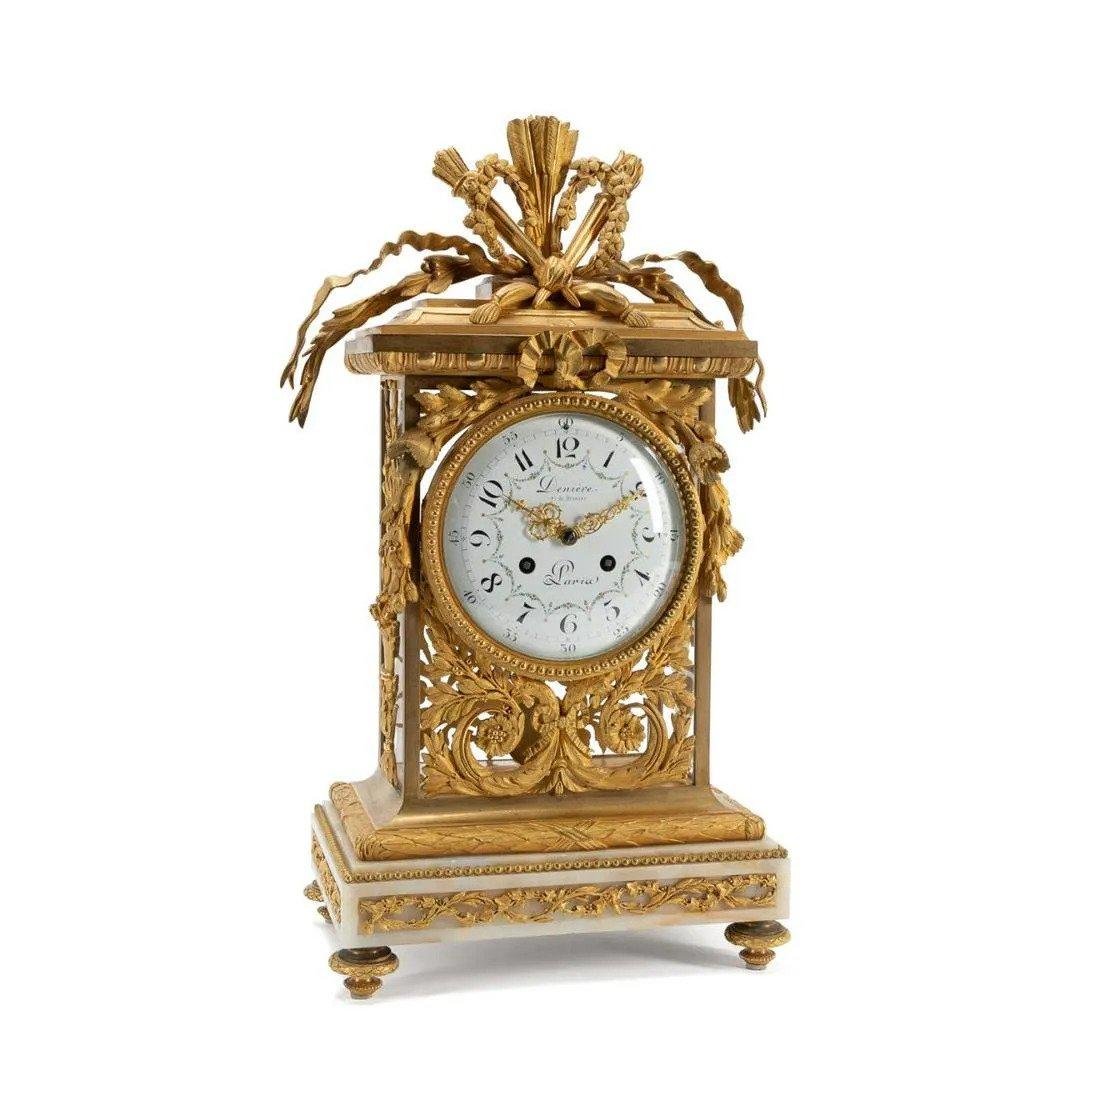 The case Jean-Francois and/or Guillaume Deniere (French, 1820-1901); the mechanism (Samuel Marti et Cie (French, 1841- ), circa 1870, finely cast gilt bronze and marble mantel clock in the Louis XVI taste, surmounted by a ribbon tied quiver and